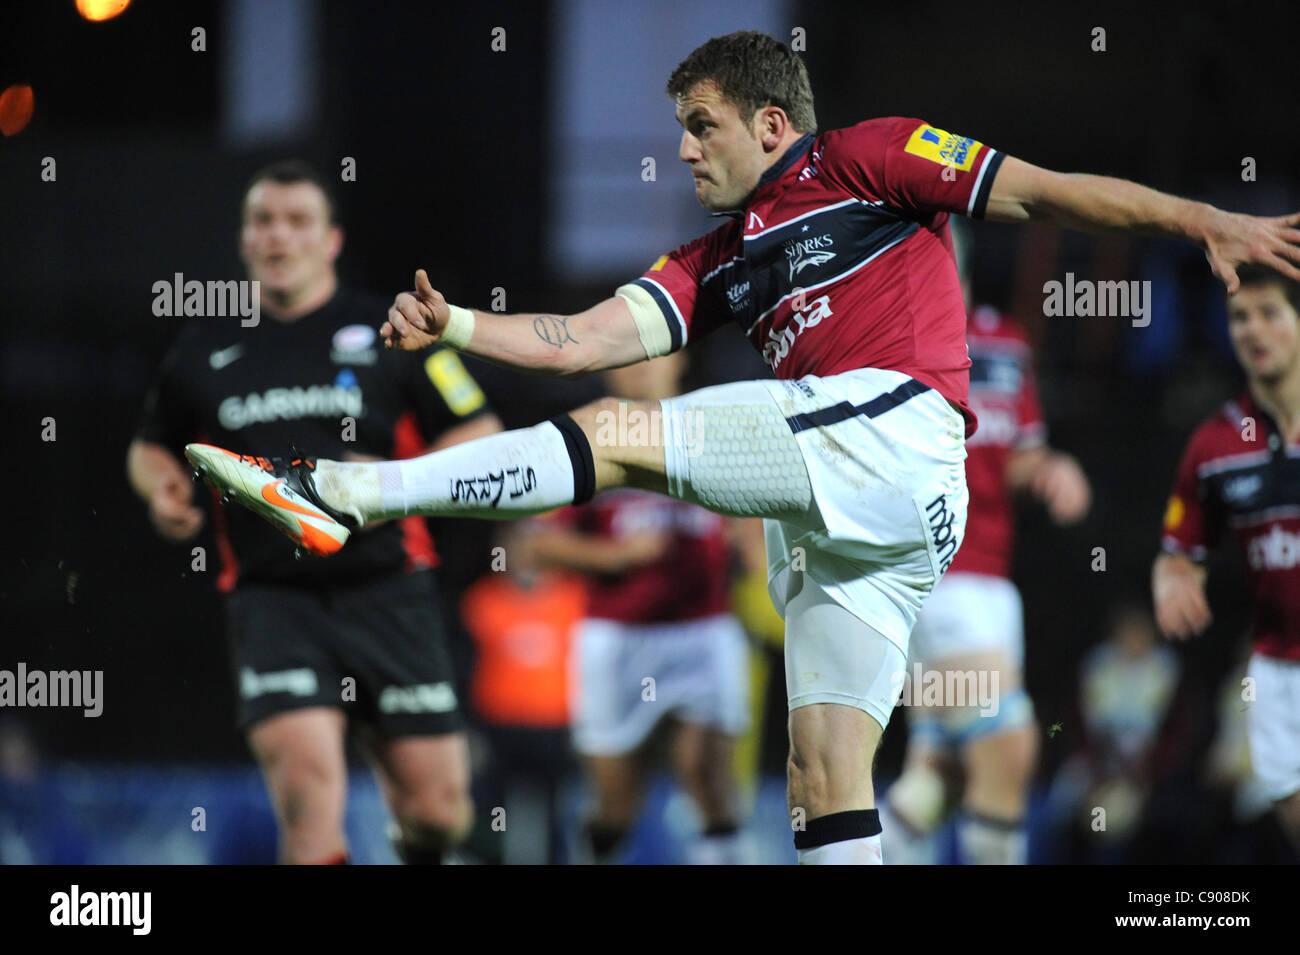 06.11.2011 Watford, England. Mark Cueto (Wing) in action during the Aviva Premiership game between Saracens and Sale Sharks. Stock Photo